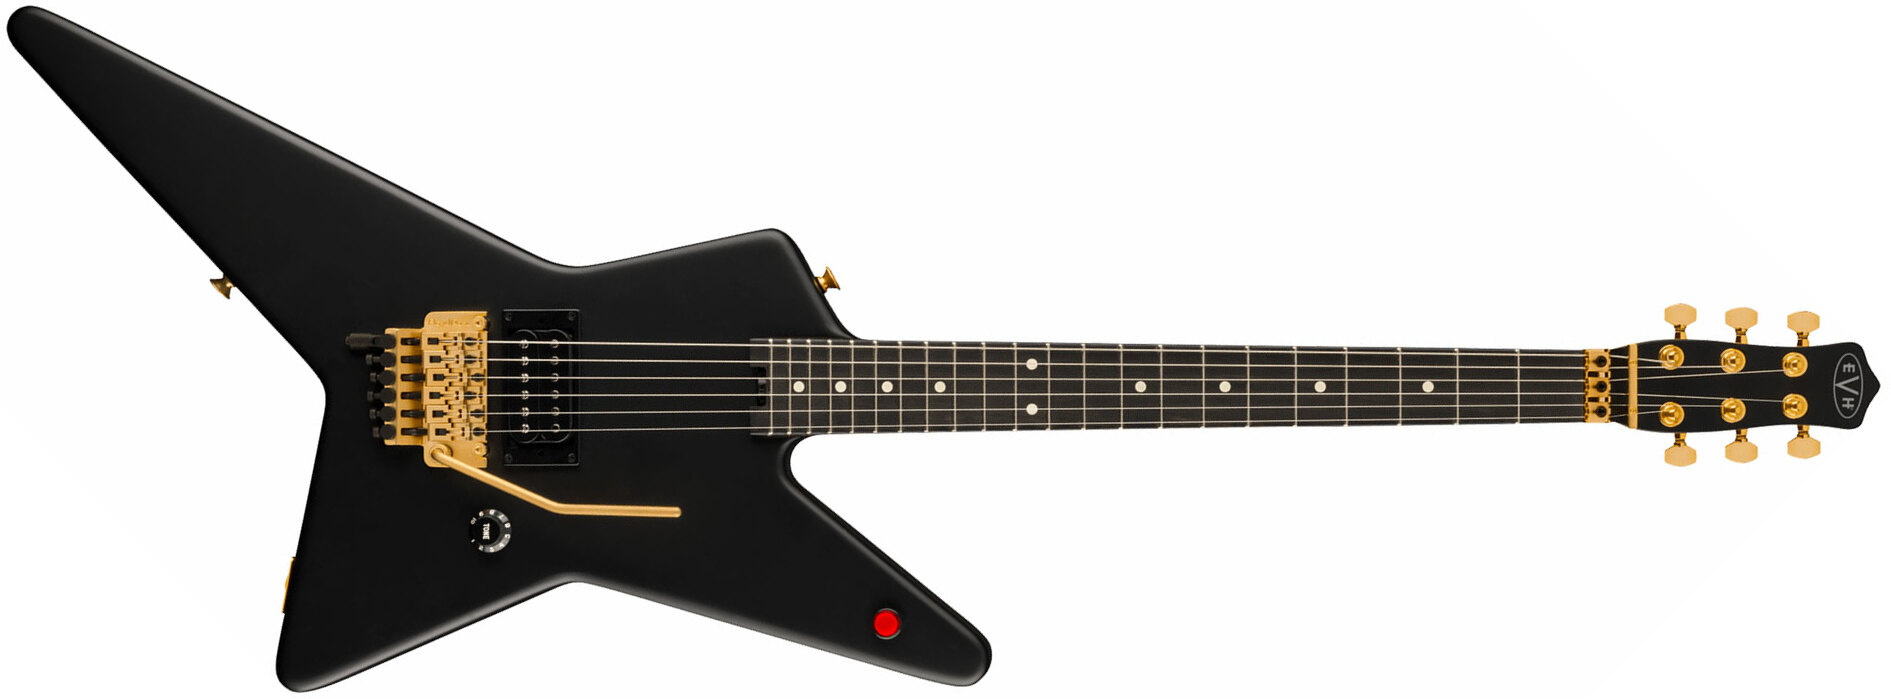 Evh Star Limited Edition 1h Fr Eb - Stealth Black With Gold Hardware - E-Gitarre aus Metall - Main picture